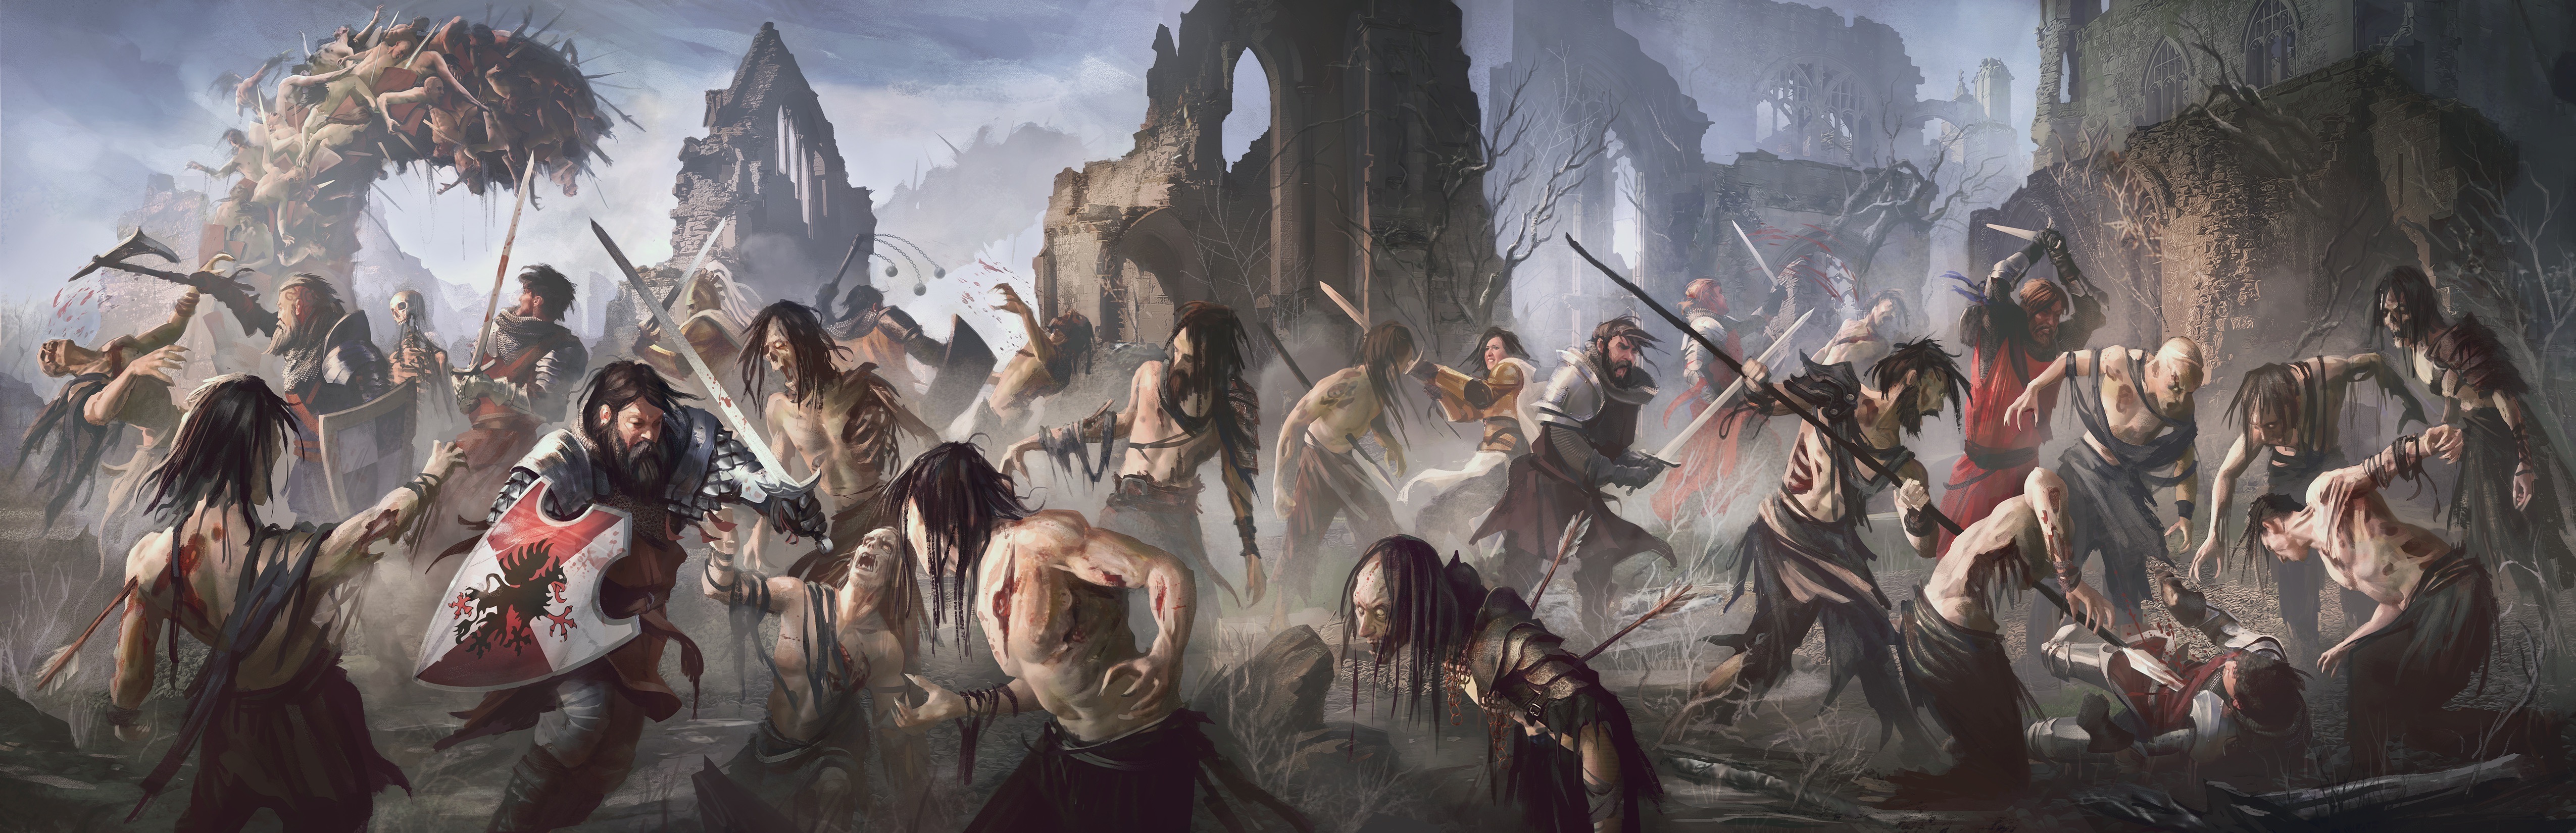 A group of beleagured-looking knights try valiantly to hold the battlefield against a shambling undead army, while a massive worm-like creature studded with armor, weapons and impaled corpses looms in the background.